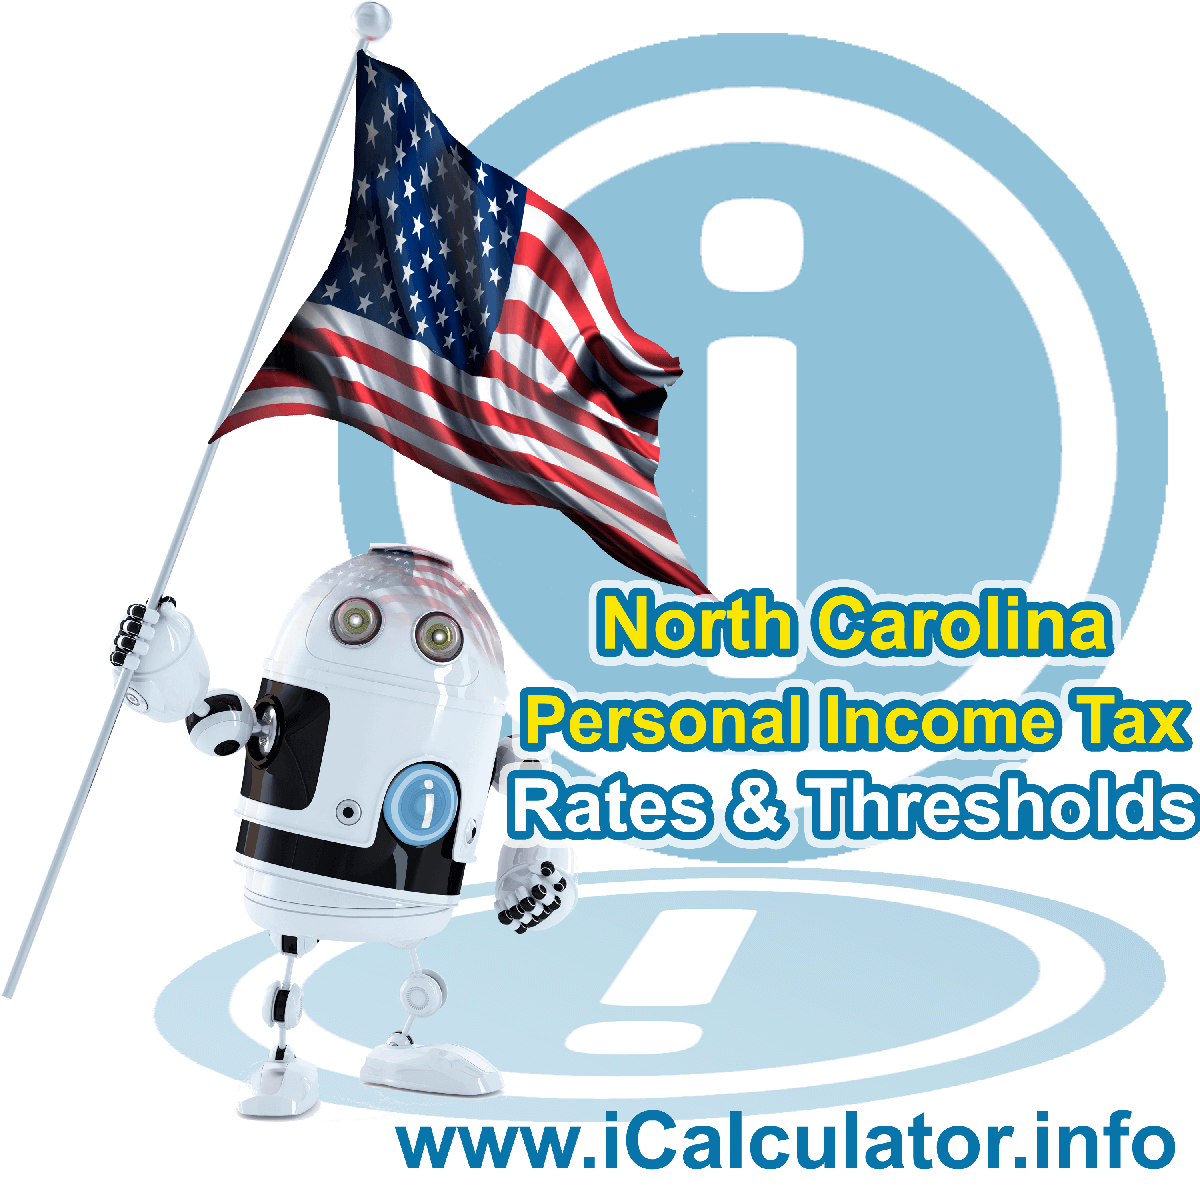 North Carolina State Tax Tables 2022. This image displays details of the North Carolina State Tax Tables for the 2022 tax return year which is provided in support of the 2022 US Tax Calculator